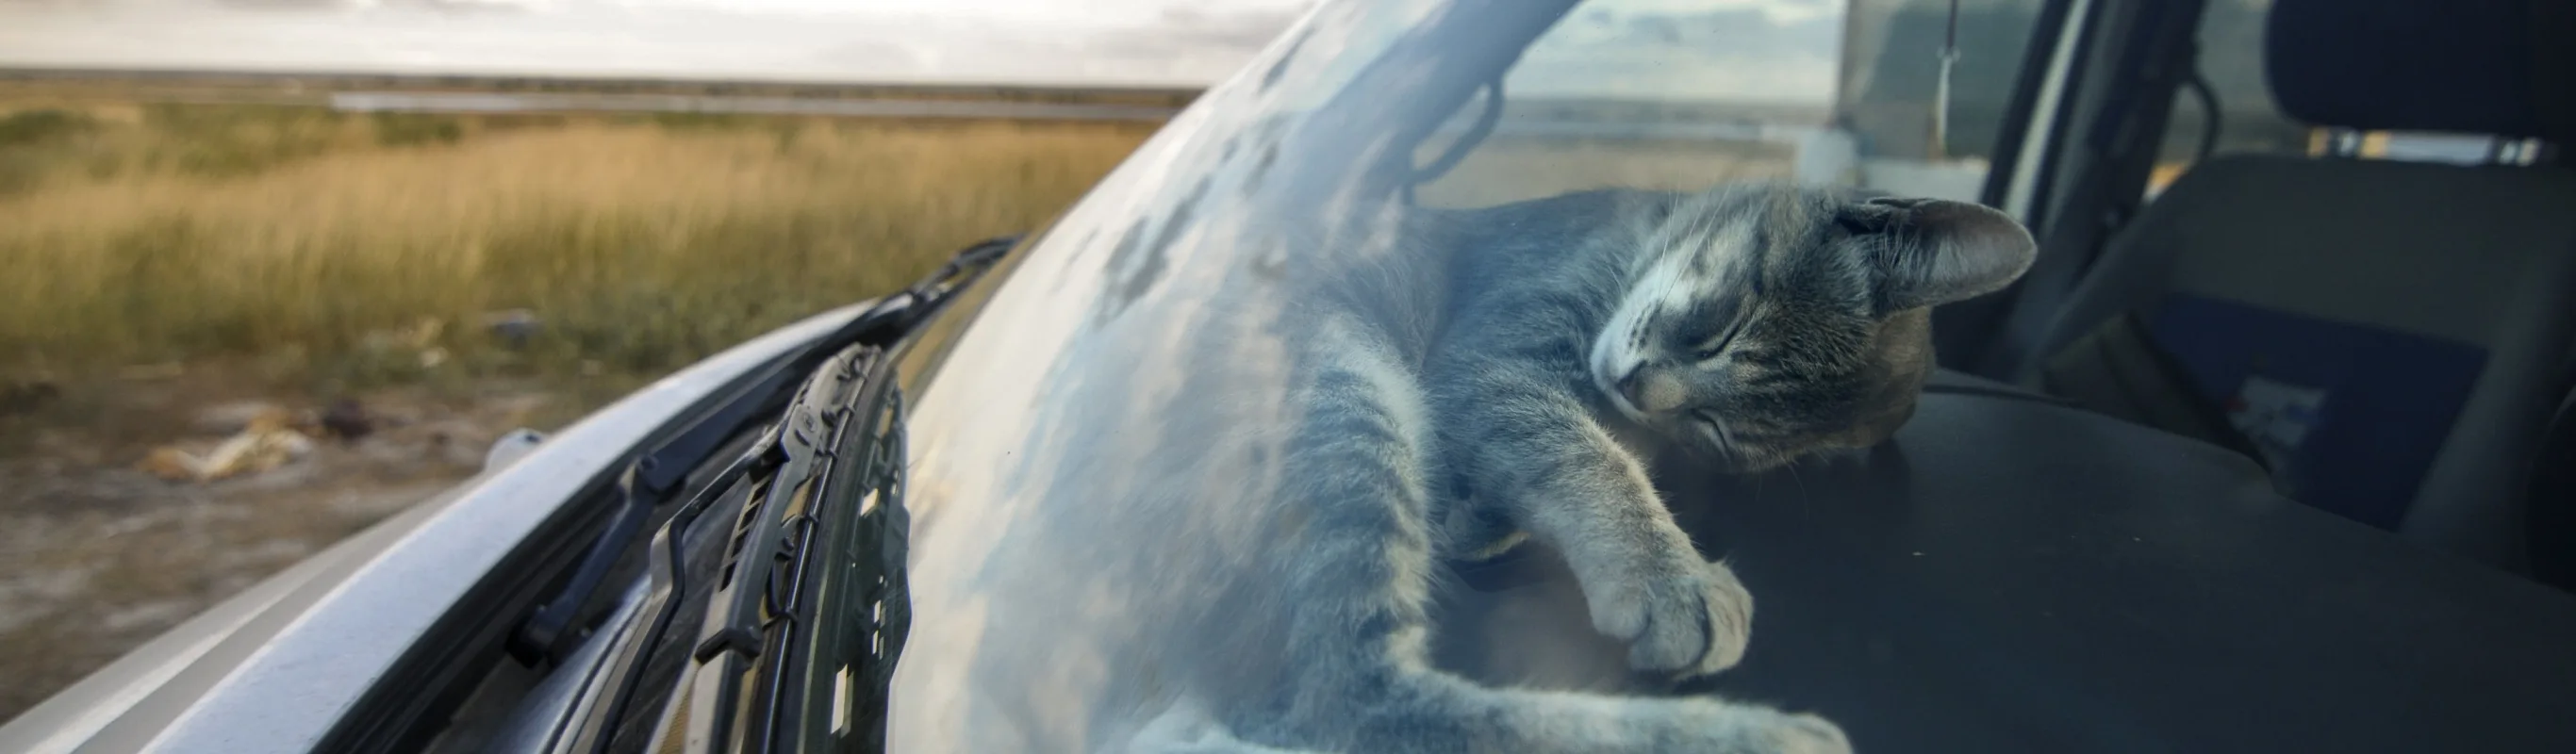 Cat sitting behind windshield of car